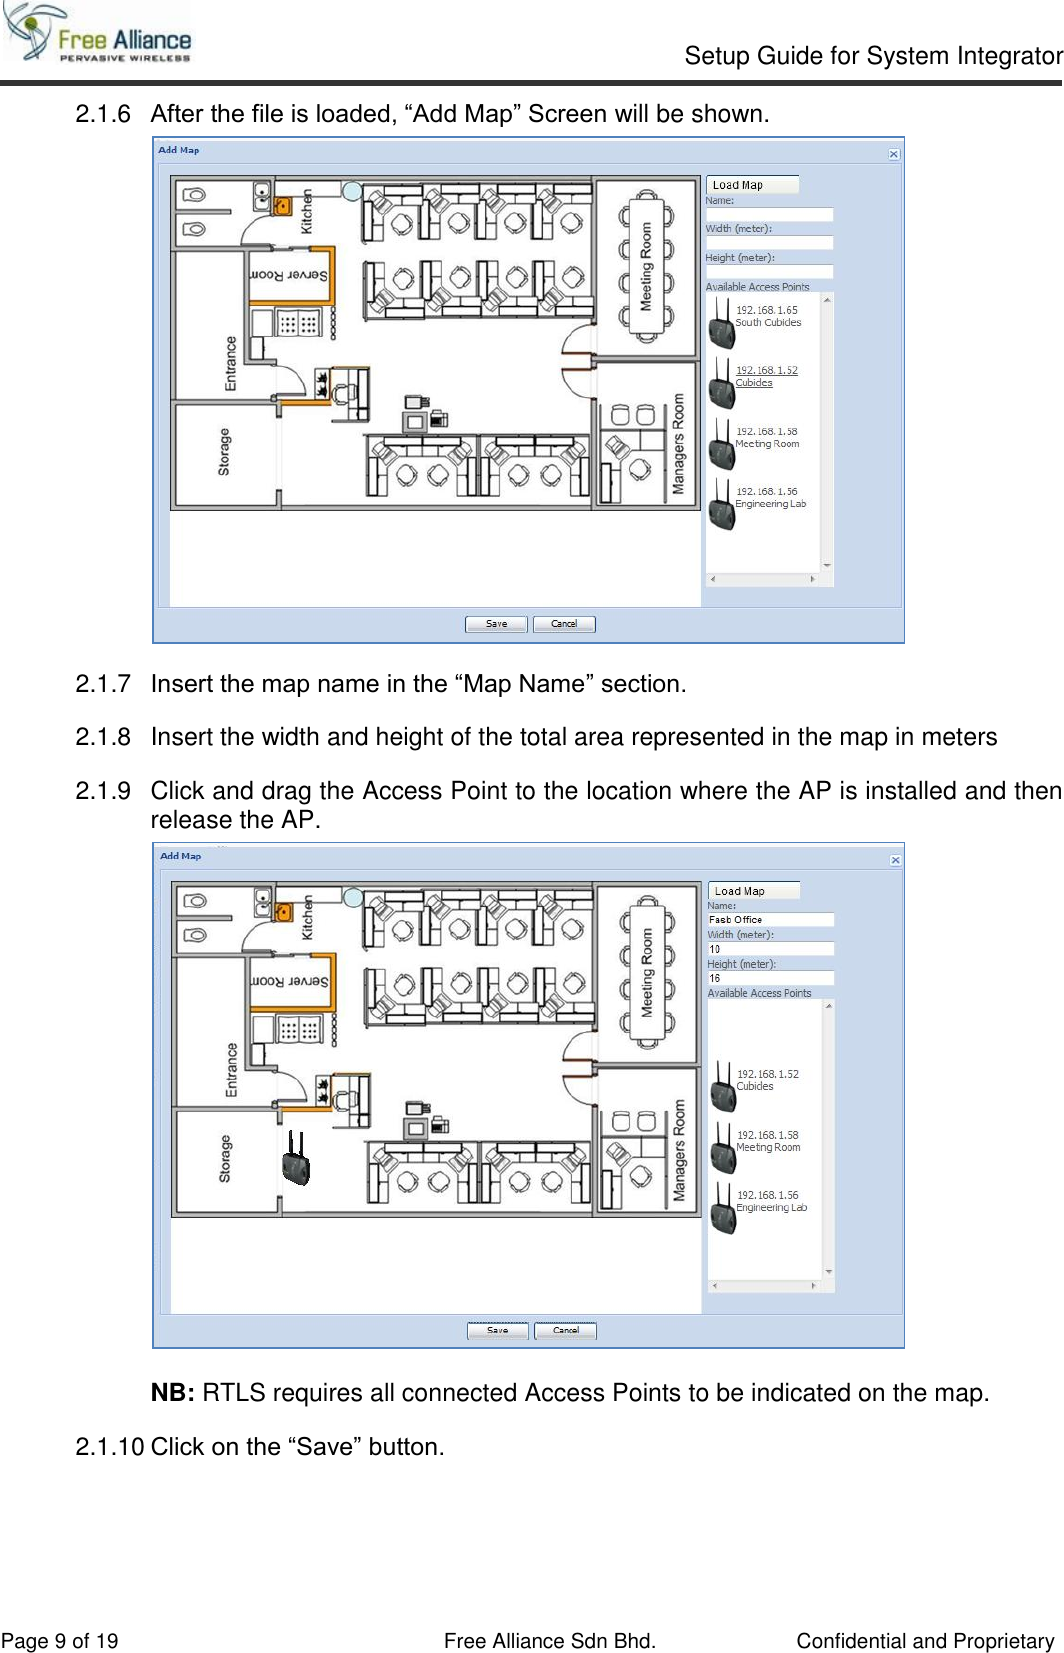     Setup Guide for System Integrator                                                                                                   Page 9 of 19 Free Alliance Sdn Bhd.             Confidential and Proprietary 2.1.6  After the file is loaded, “Add Map” Screen will be shown.   2.1.7  Insert the map name in the “Map Name” section. 2.1.8  Insert the width and height of the total area represented in the map in meters 2.1.9  Click and drag the Access Point to the location where the AP is installed and then release the AP.   NB: RTLS requires all connected Access Points to be indicated on the map. 2.1.10 Click on the “Save” button.     